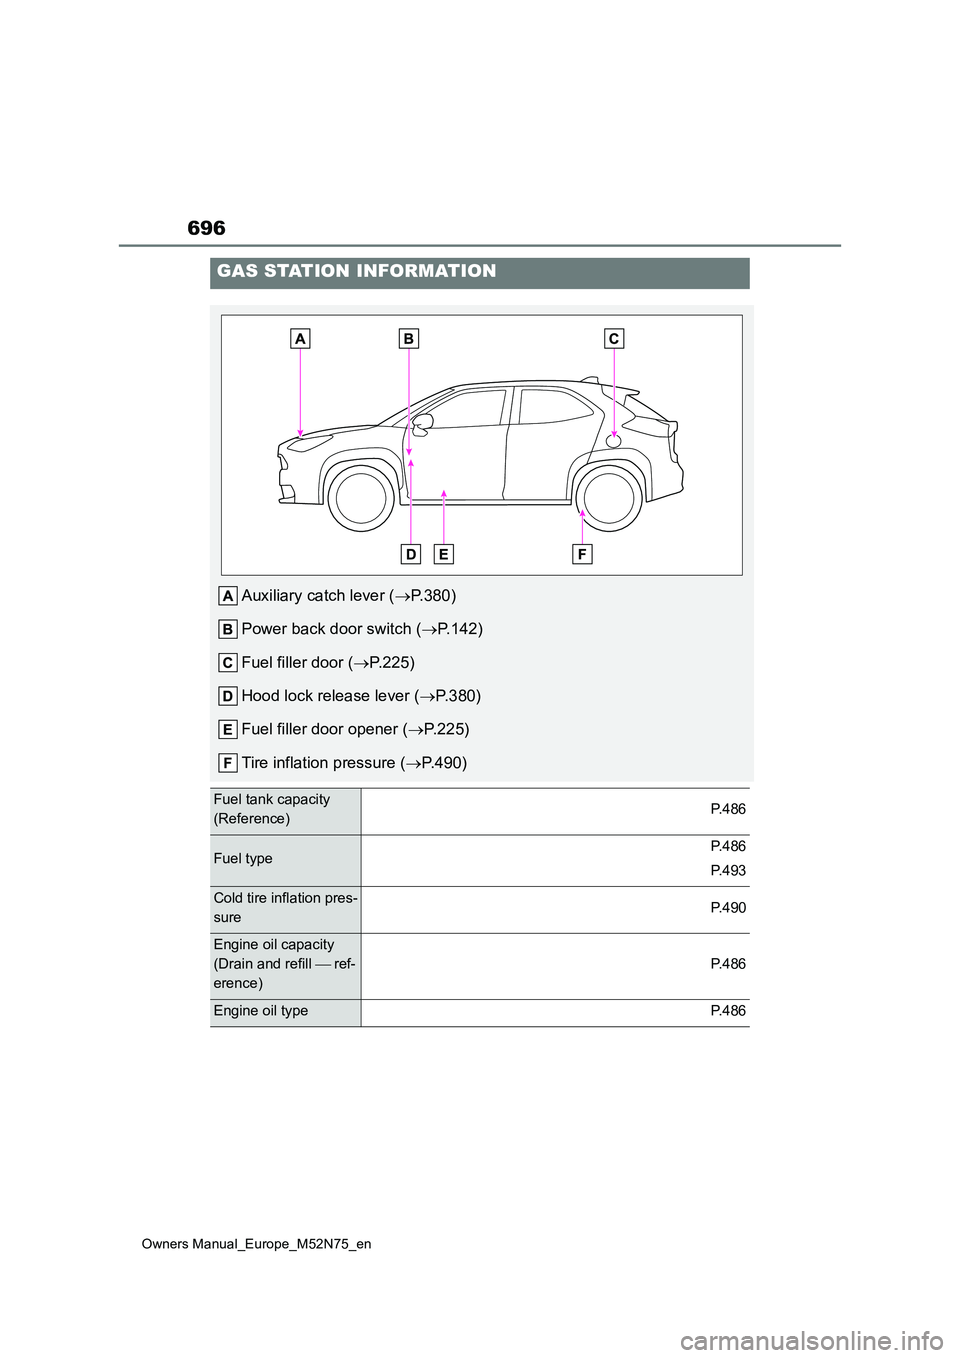 TOYOTA YARIS CROSS 2023  Owners Manual 696
Owners Manual_Europe_M52N75_en
GAS STATION INFORMATION
Auxiliary catch lever (P.380) 
Power back door switch ( P.142) 
Fuel filler door ( P.225) 
Hood lock release lever ( P.380) 
Fuel